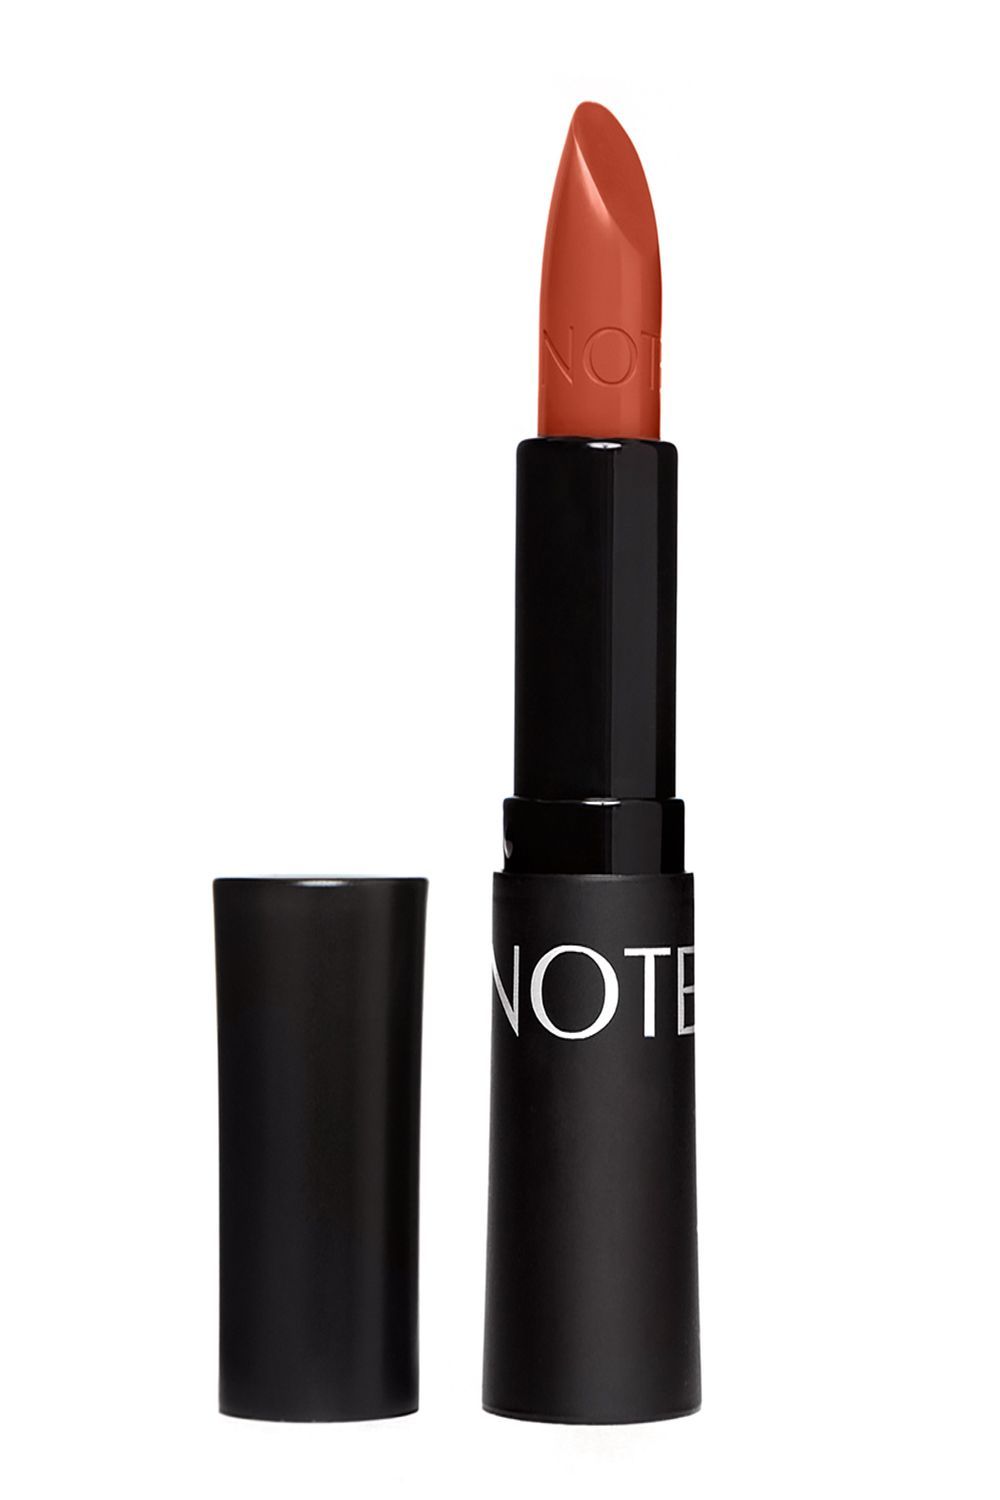 Buy NOTE ULTRA RICH COLOR LIPSTICK 09(Bronzed Pink) - Purplle